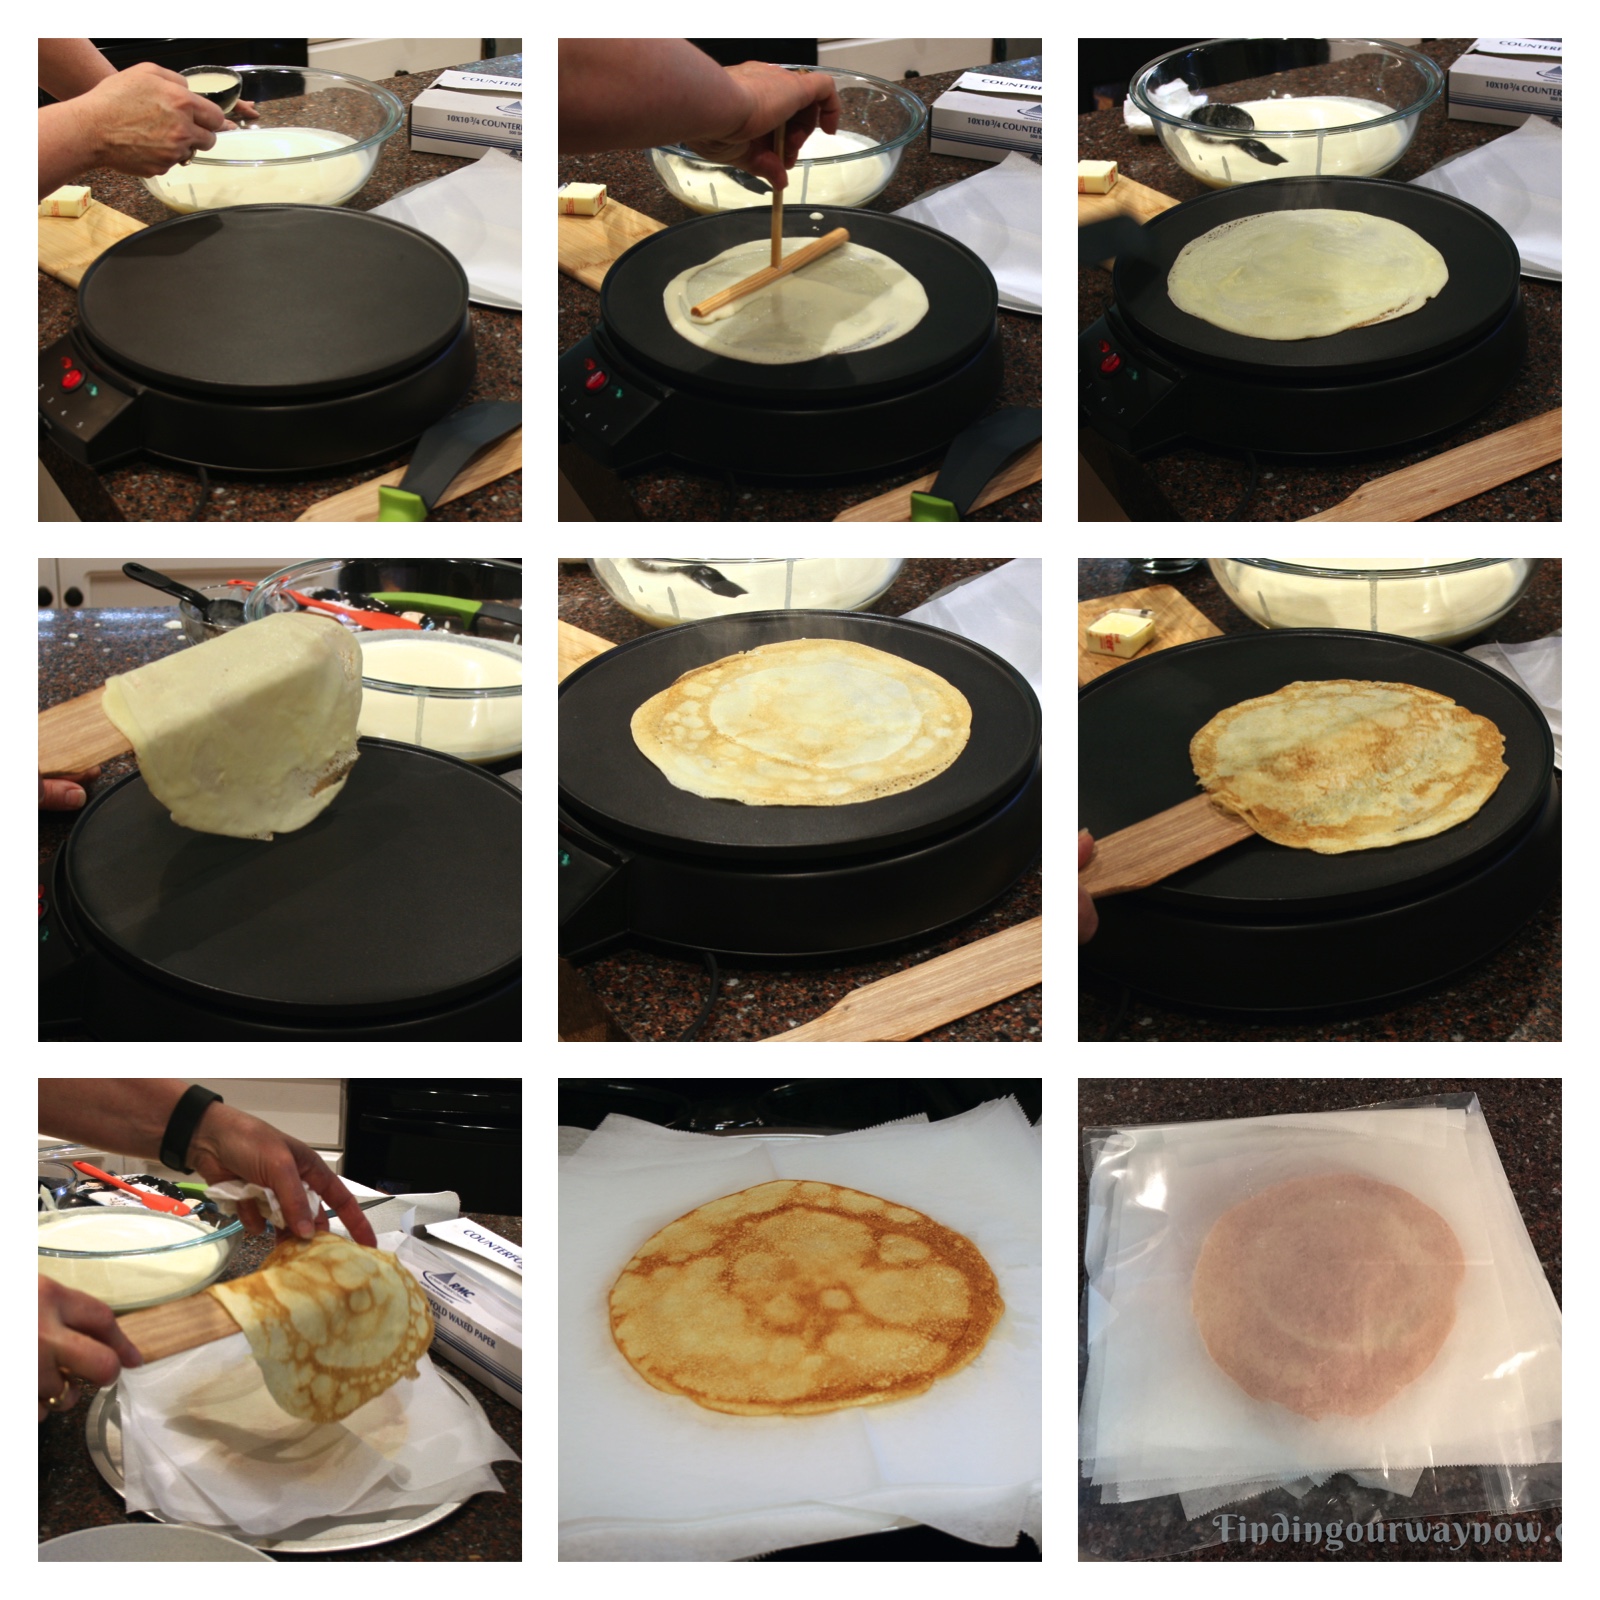 Homemade Crepe In The Making, findingourwaynow.com